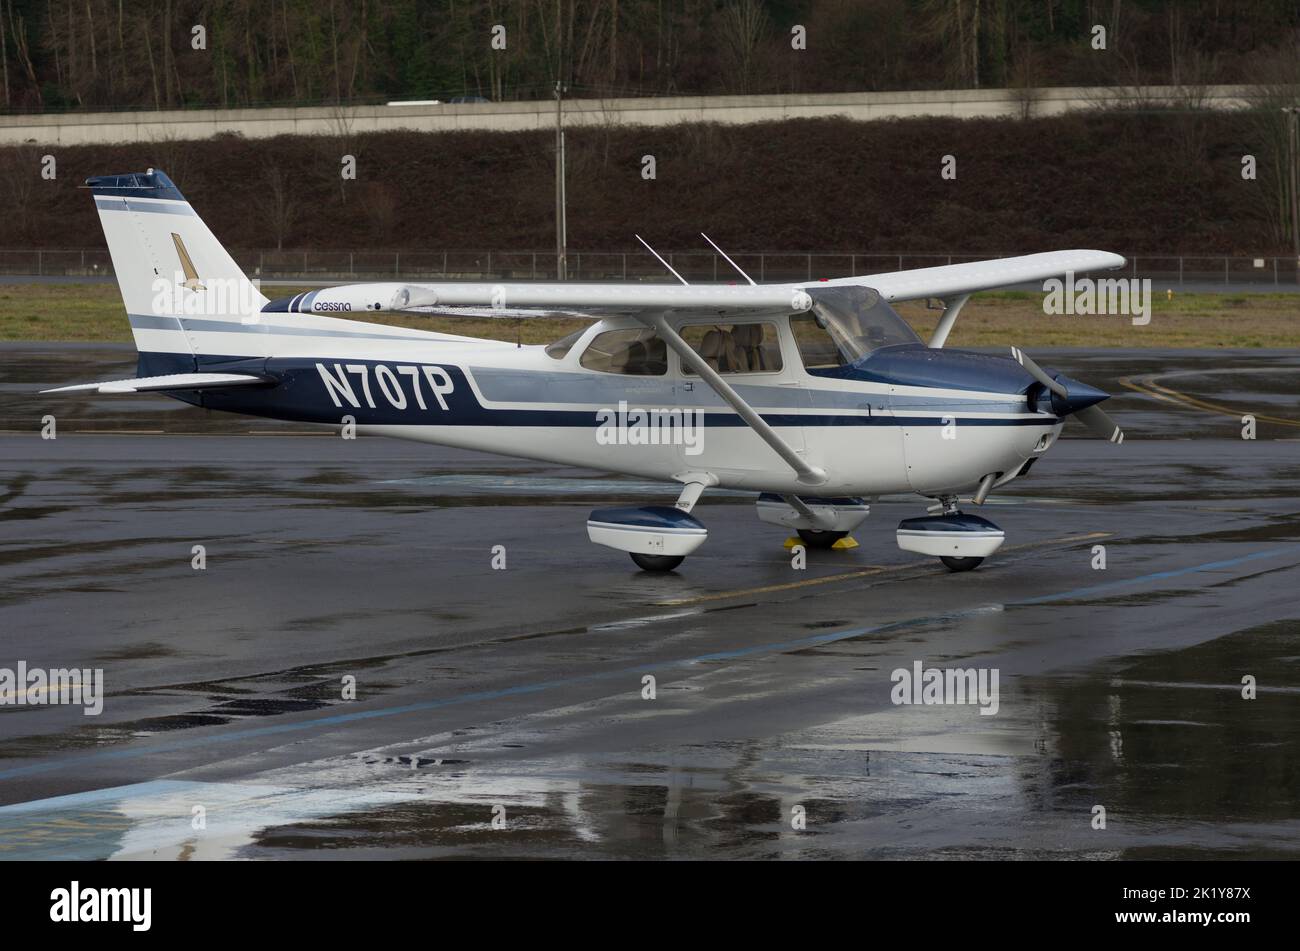 Seattle, Whasignton, Uninited States - January 16th, 2016: 1975 Cessna 172M with registration N707P shown parked on a rainy day. Stock Photo